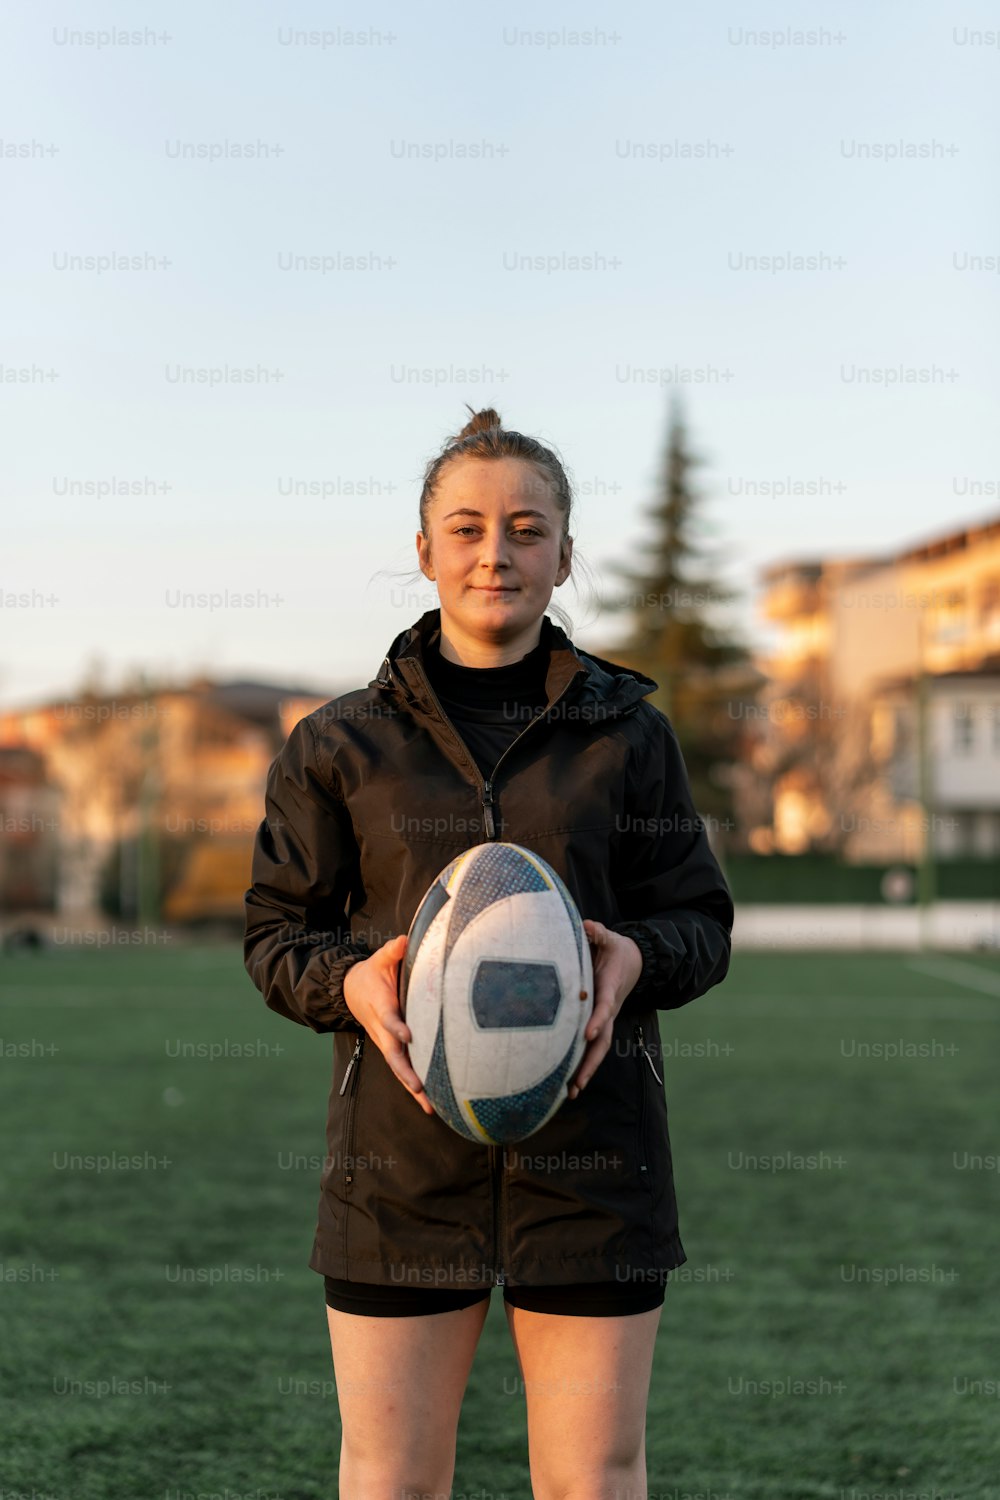 a woman holding a soccer ball on a field